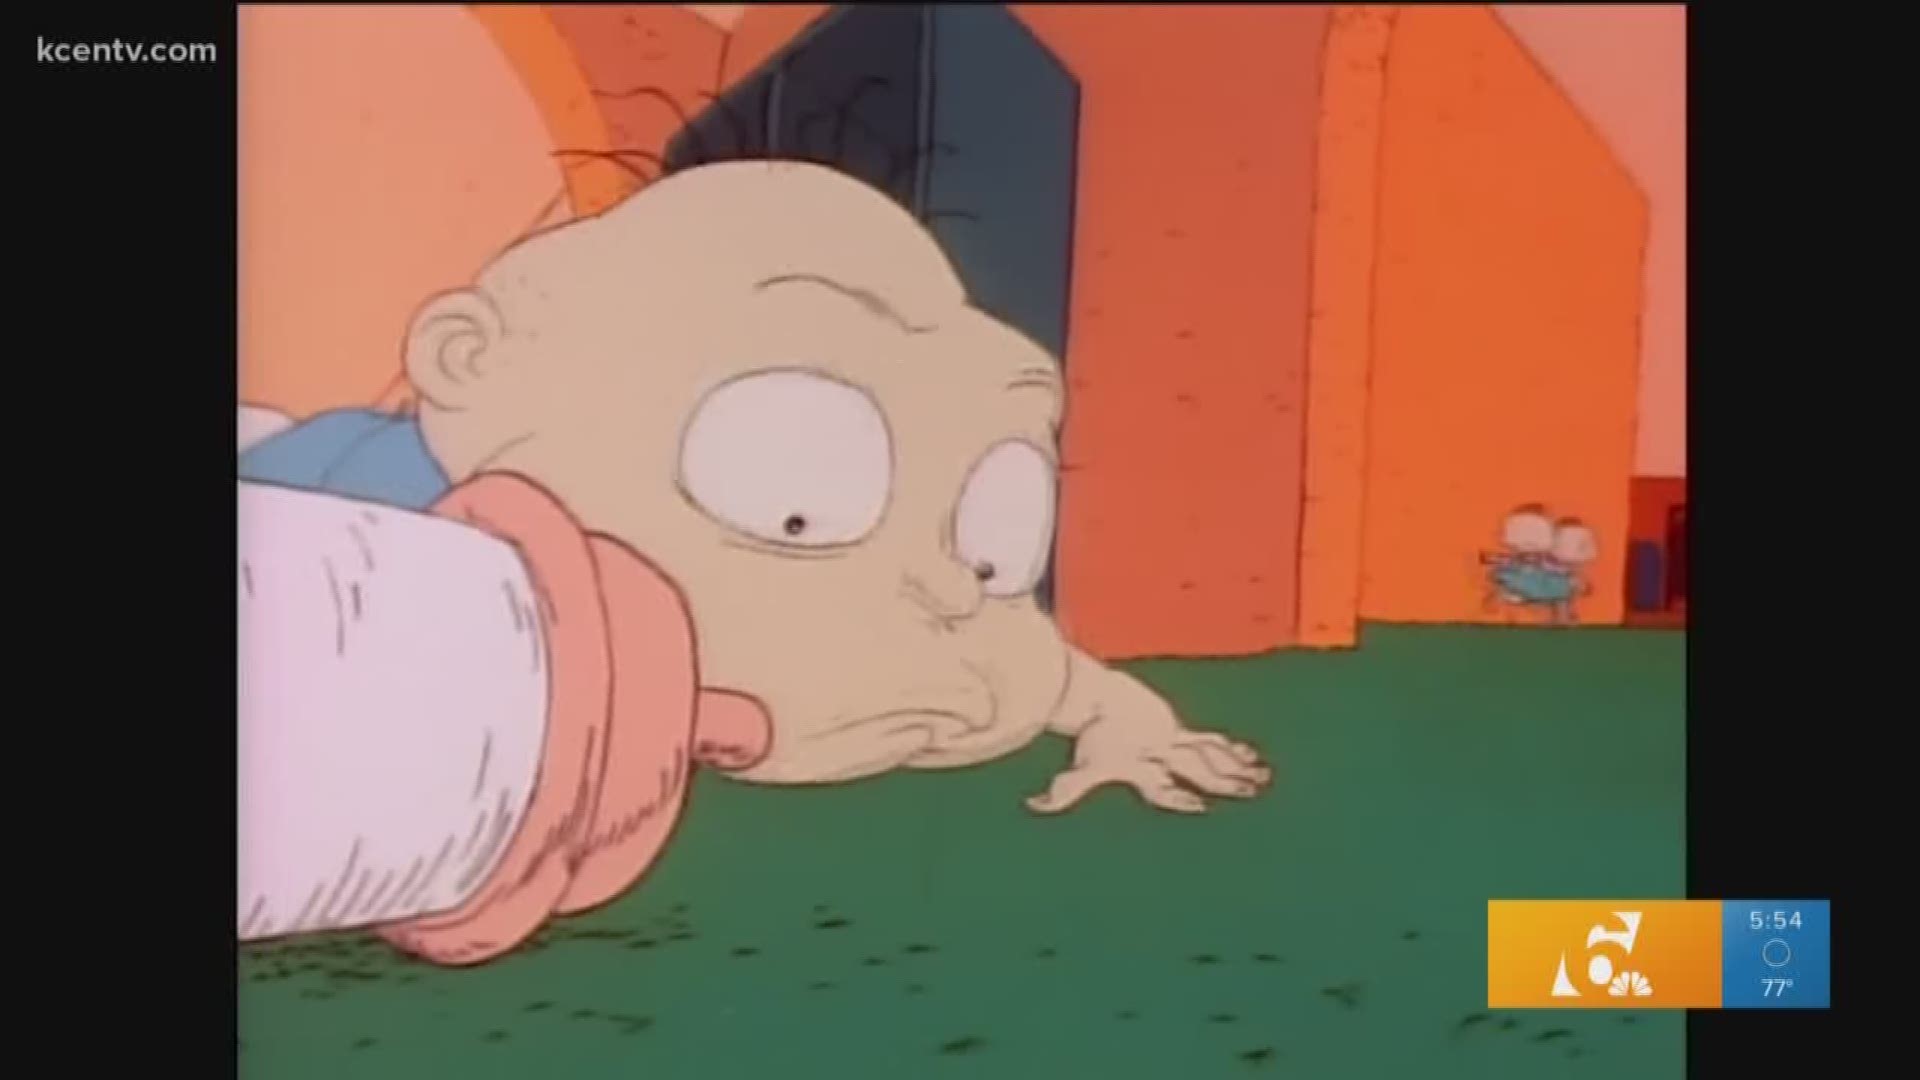 Amazon Prime Day outage, Model breastfeeds on runway, and Rugrats making a return to TV. 